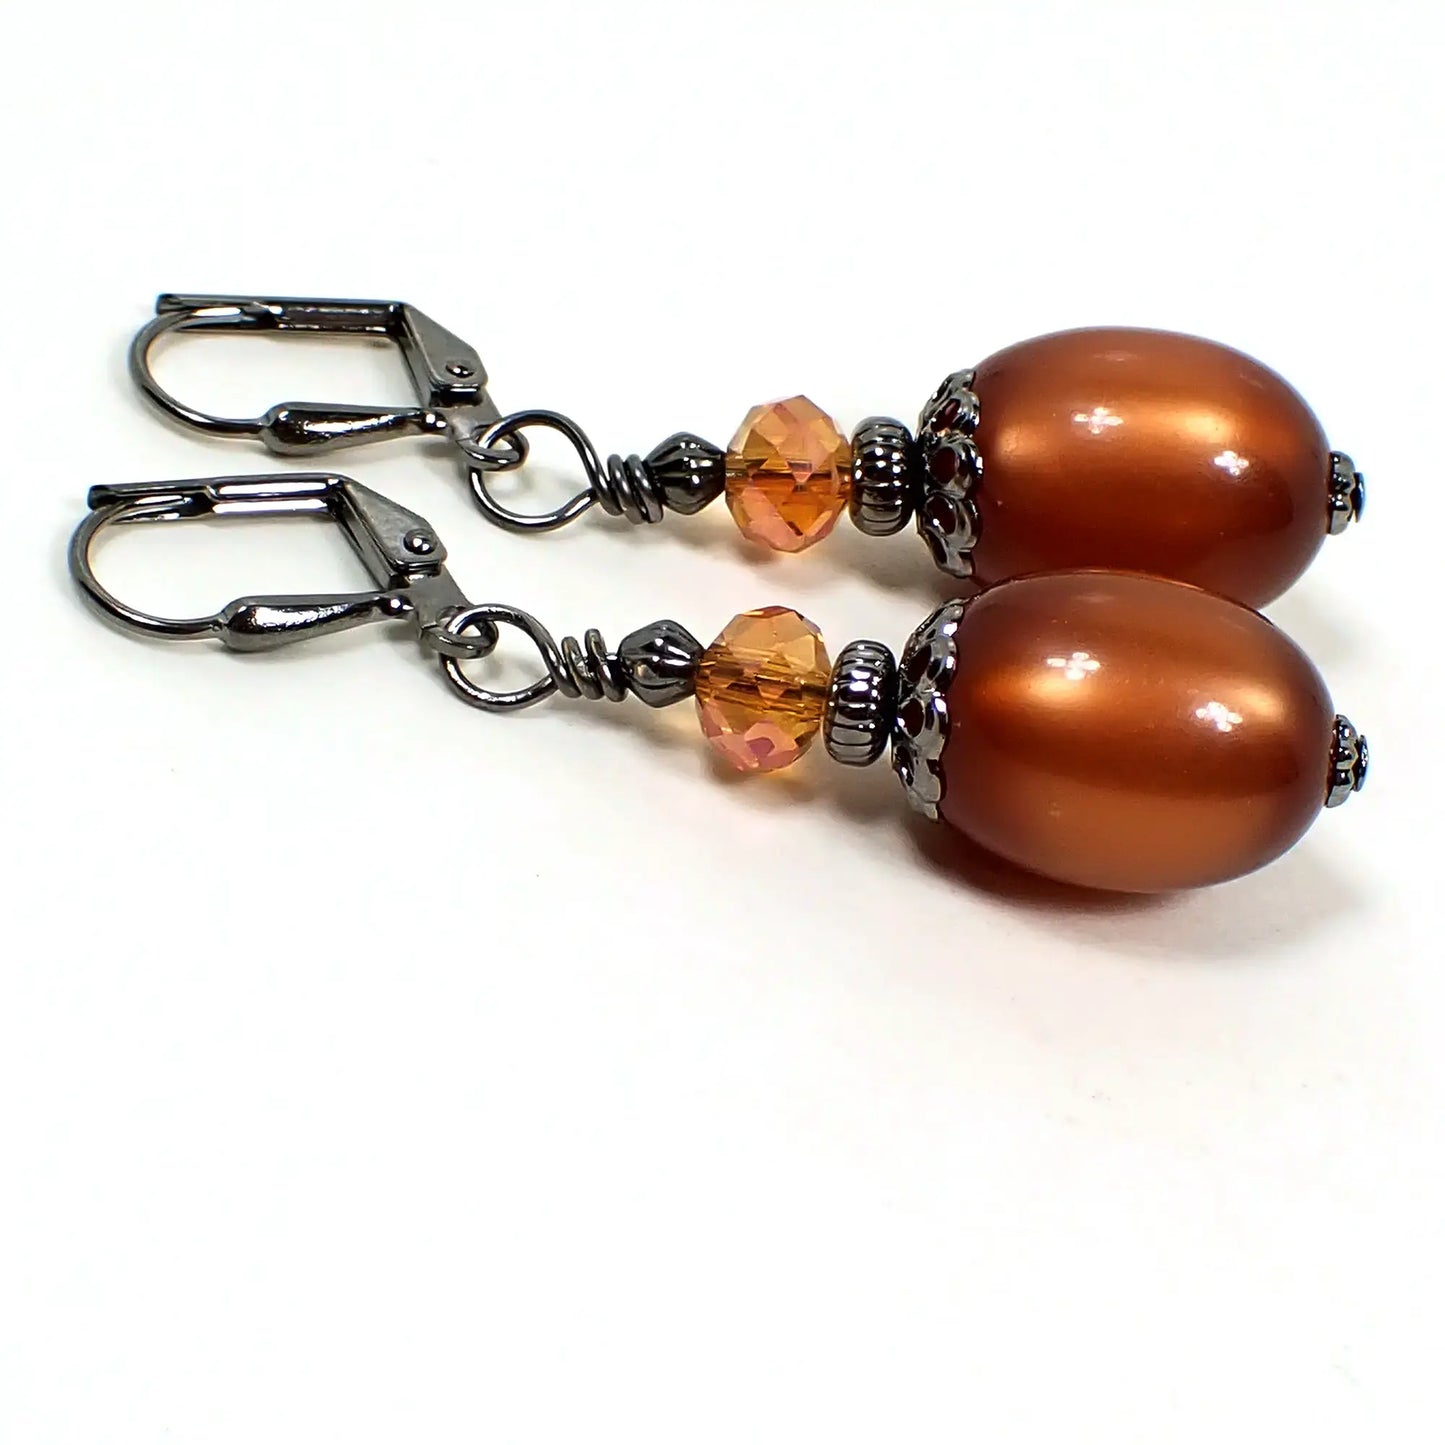 Golden Brown and Orange Moonglow Lucite Oval Handmade Drop Earrings Gunmetal Hook Lever Back or Clip On